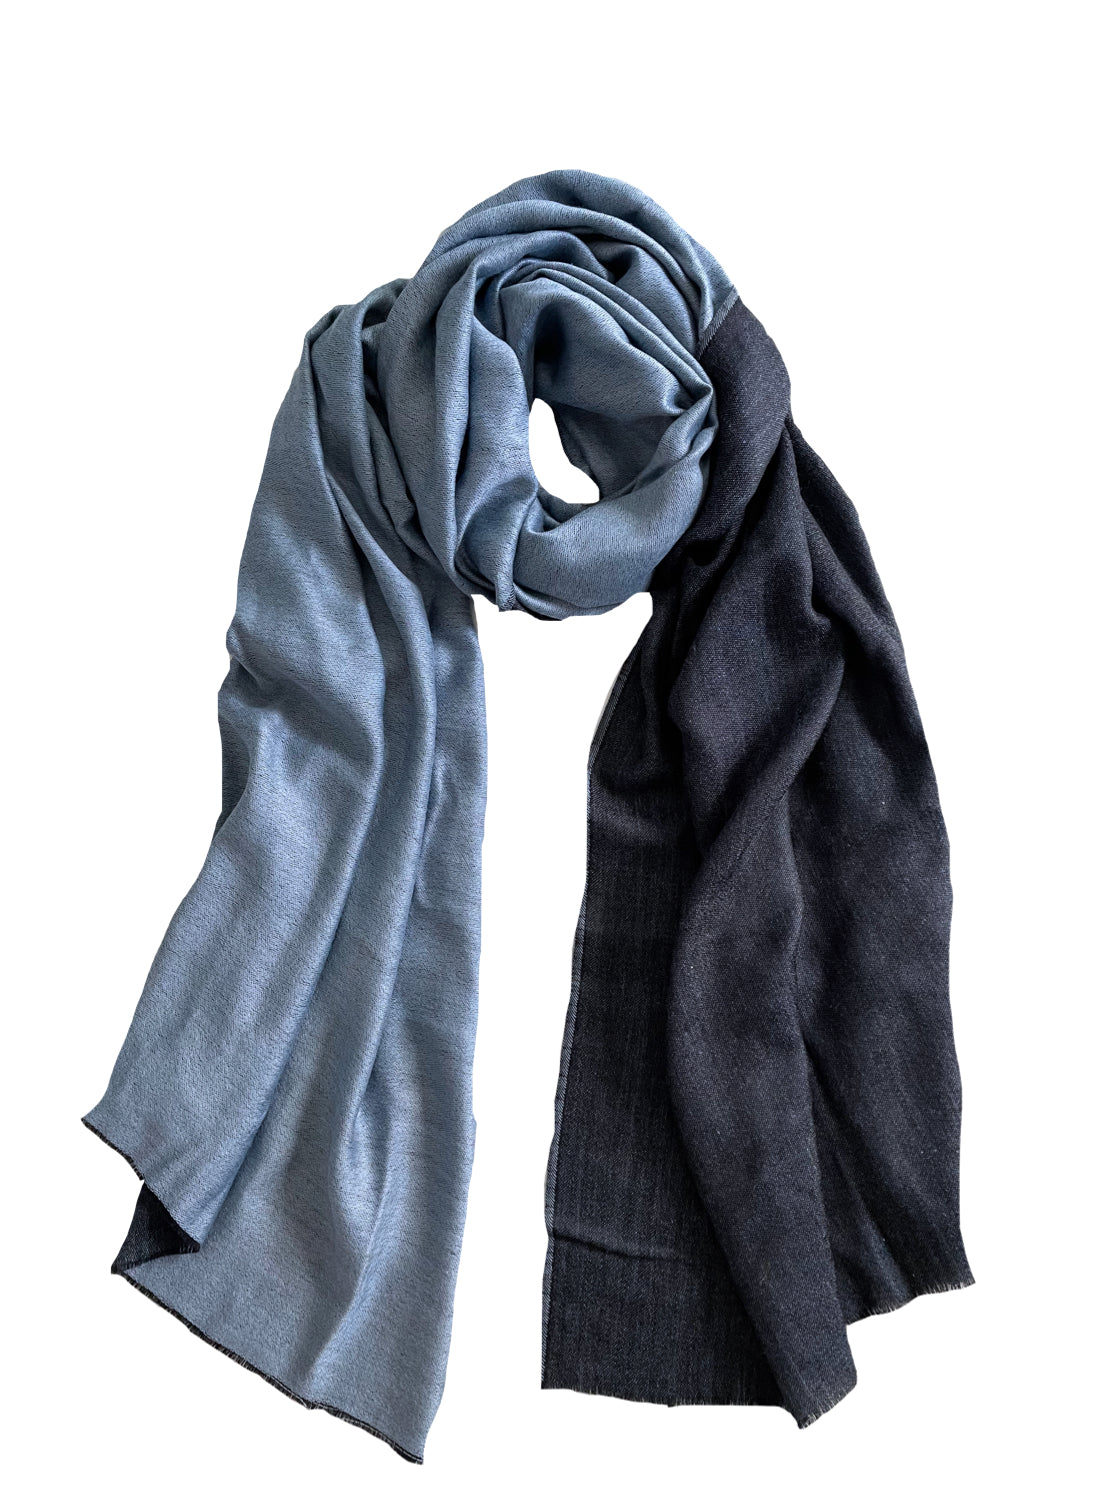 WOVEN Reversible Cashmere Scarf - Icey Grey